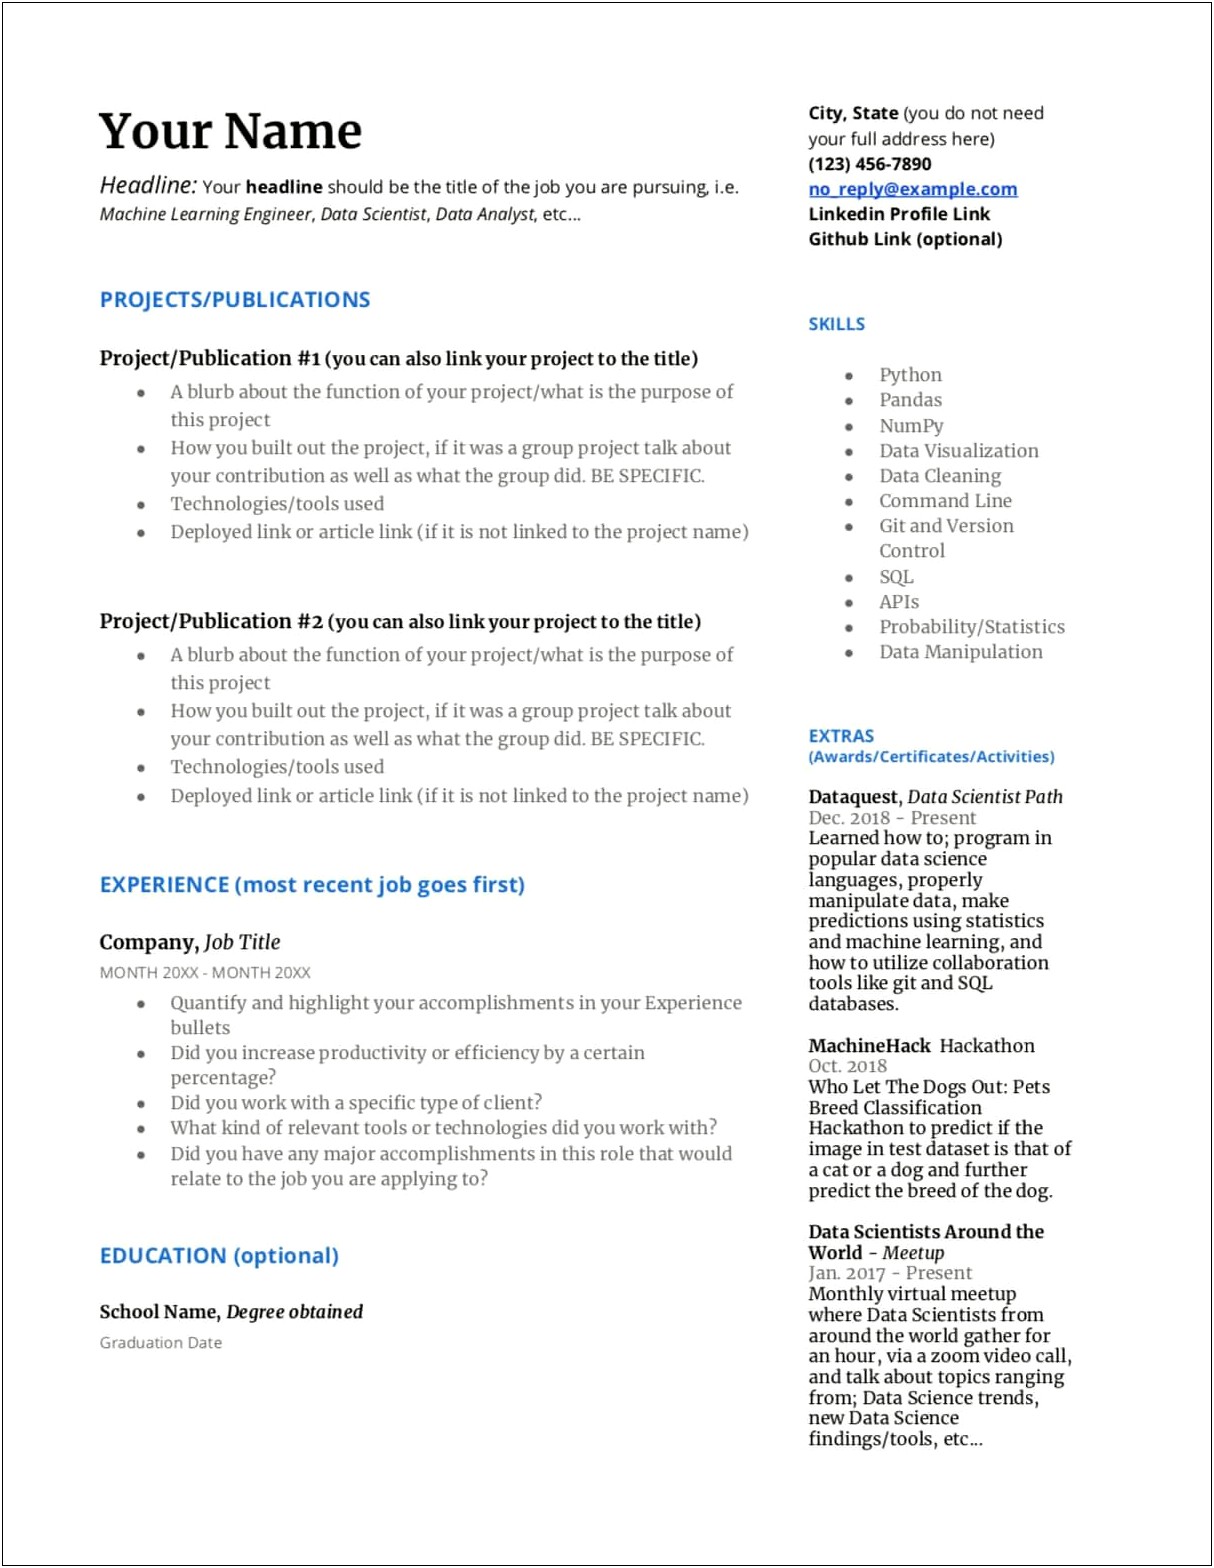 Resume Templates For Engineering Jobs